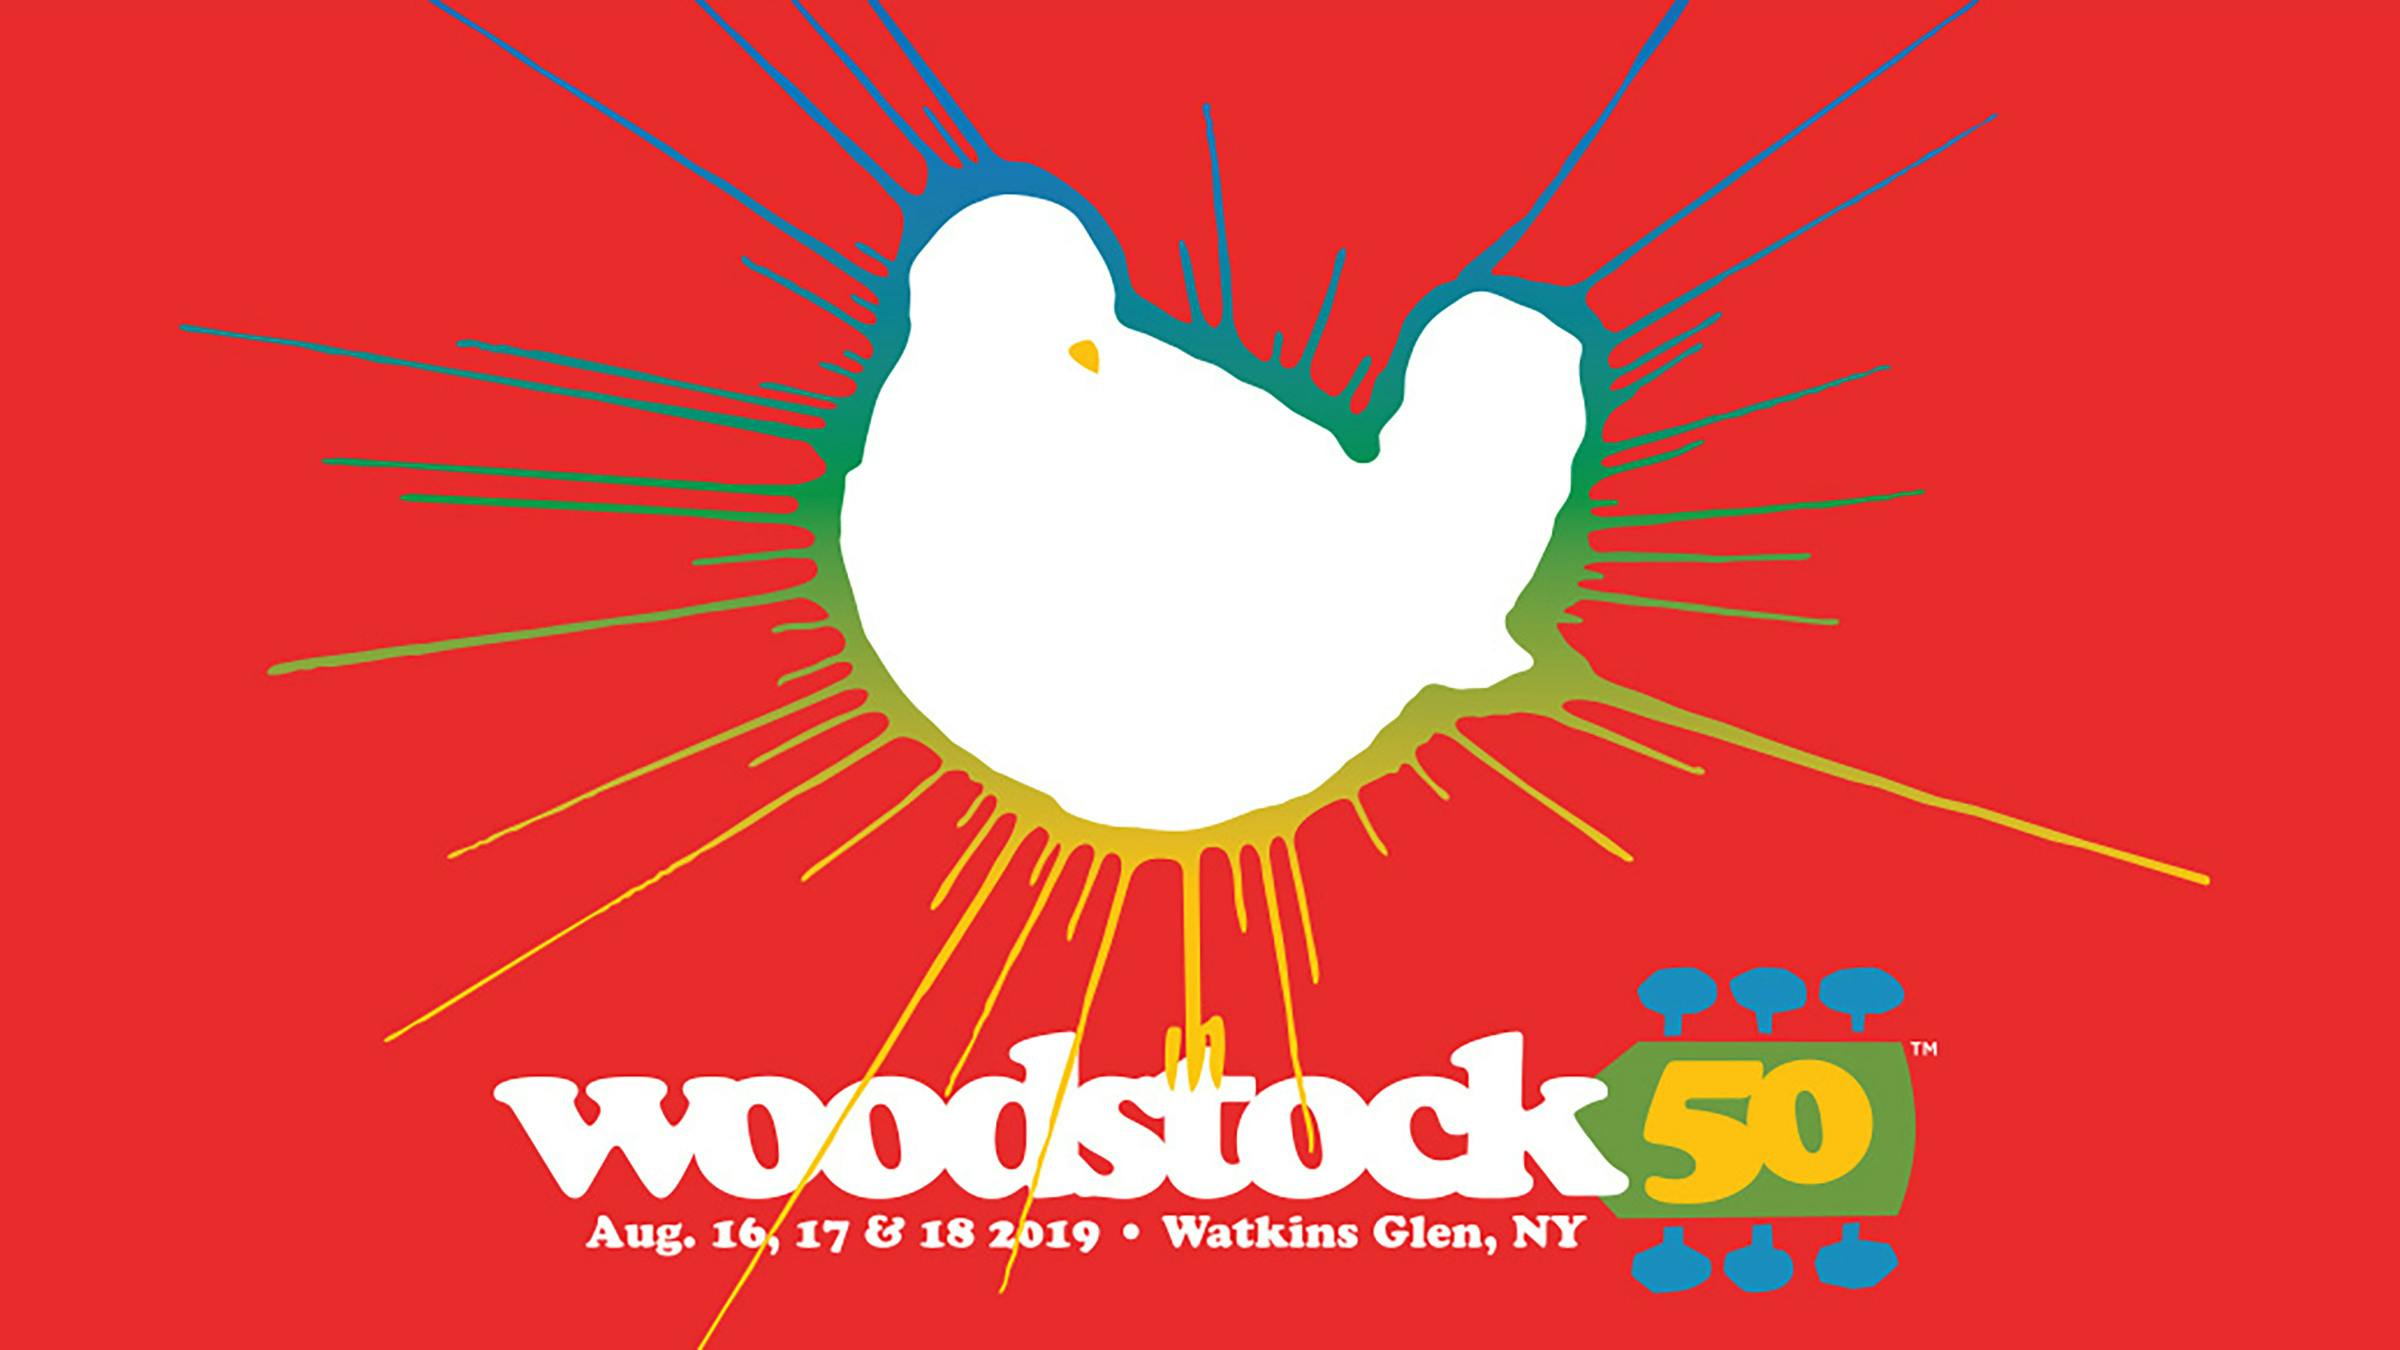 Woodstock 50 Founder Claims Investors "Illegally Swept" $17 Million From Festival